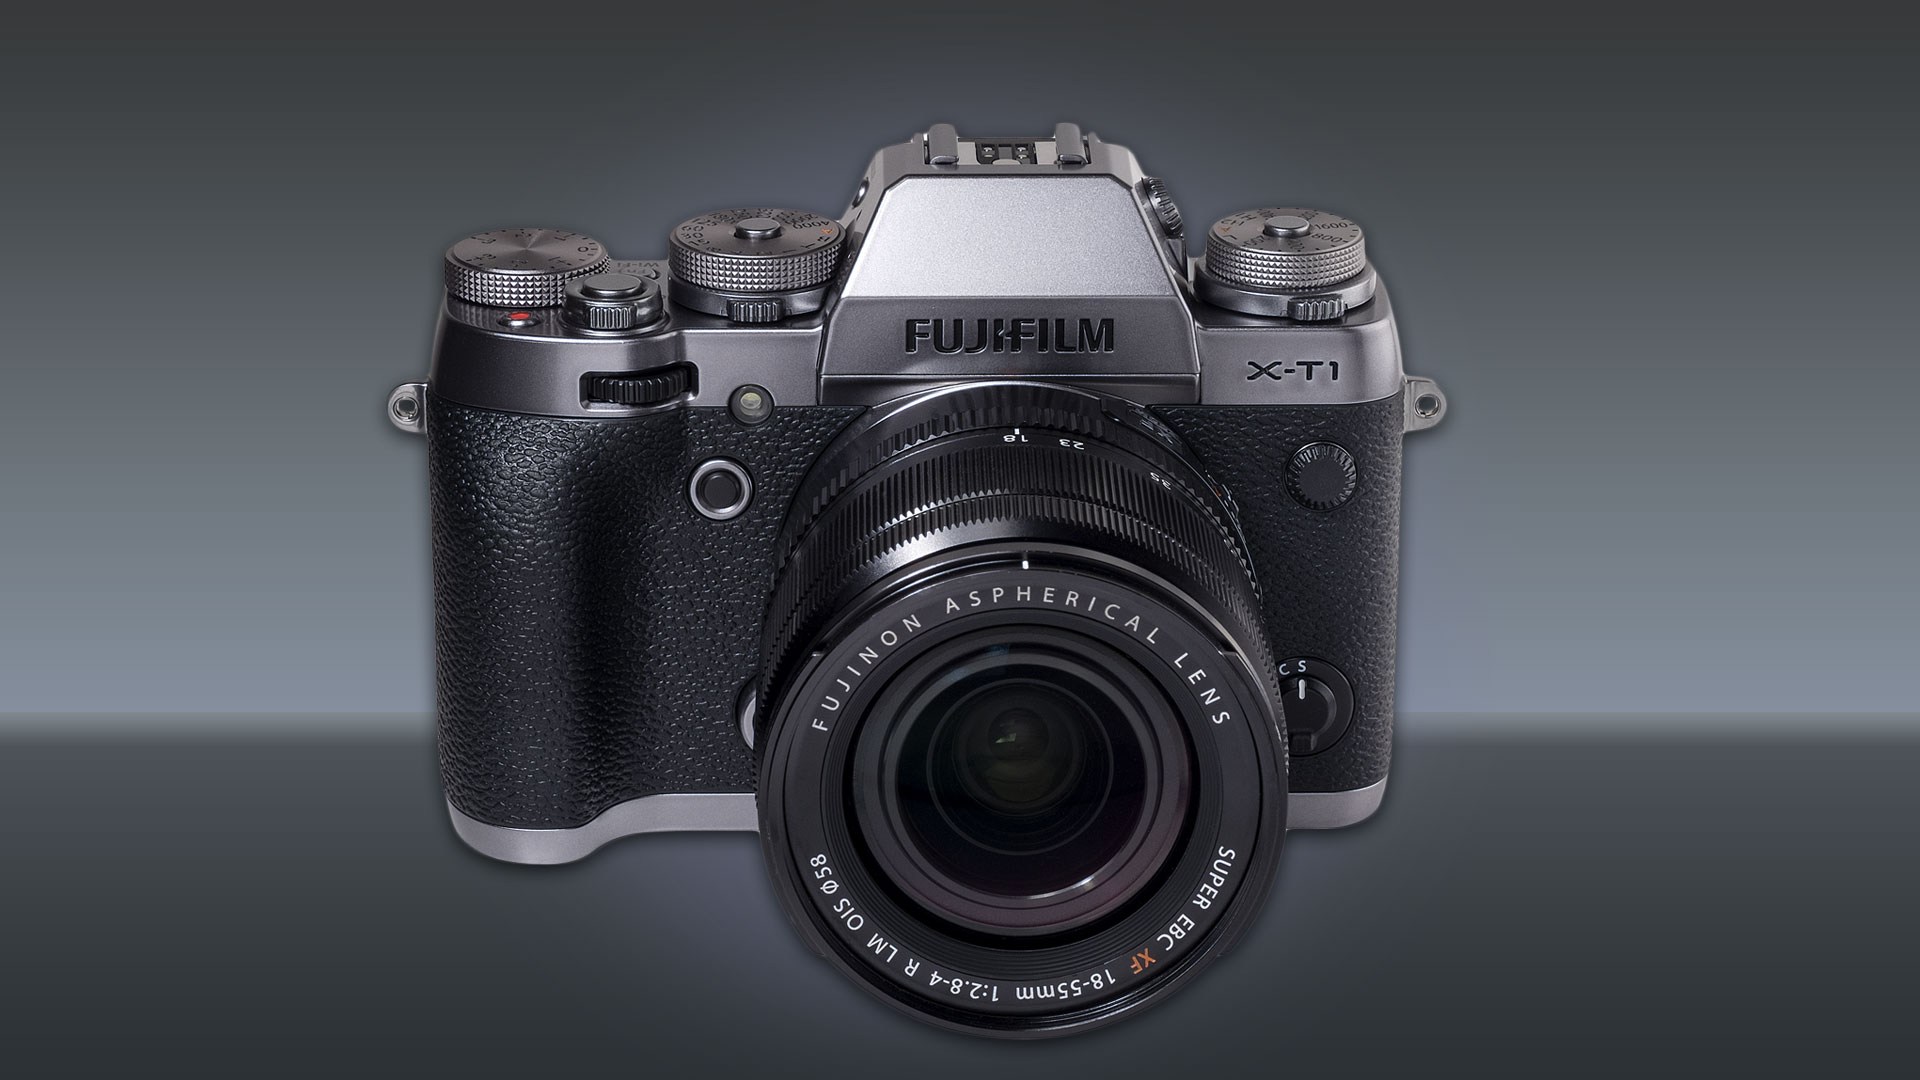 The new Fuji X-T1 Graphite Edition is not just a pretty paint job